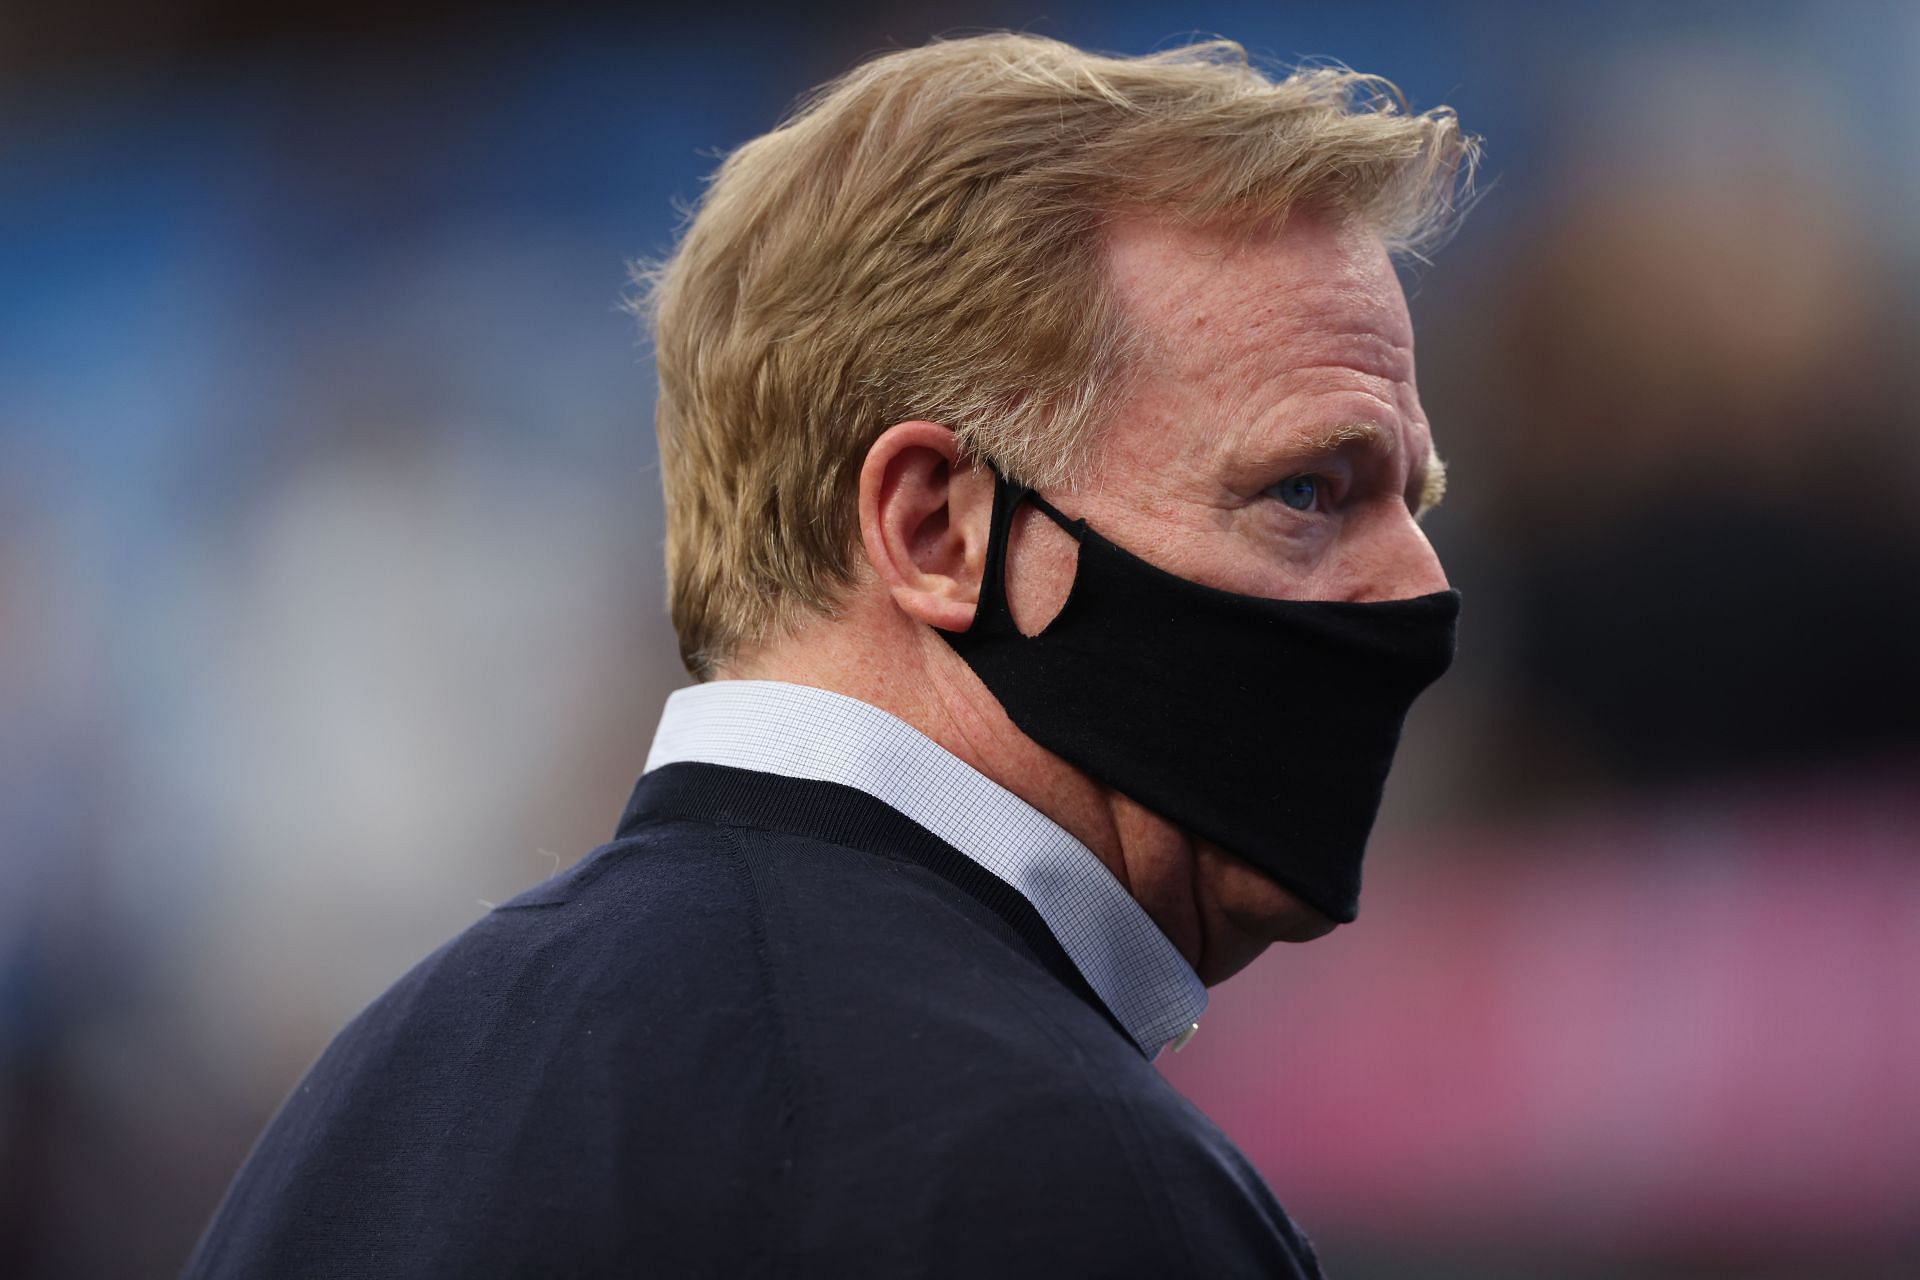 NFL commissioner Roger Goddell has a tough few days ahead of him